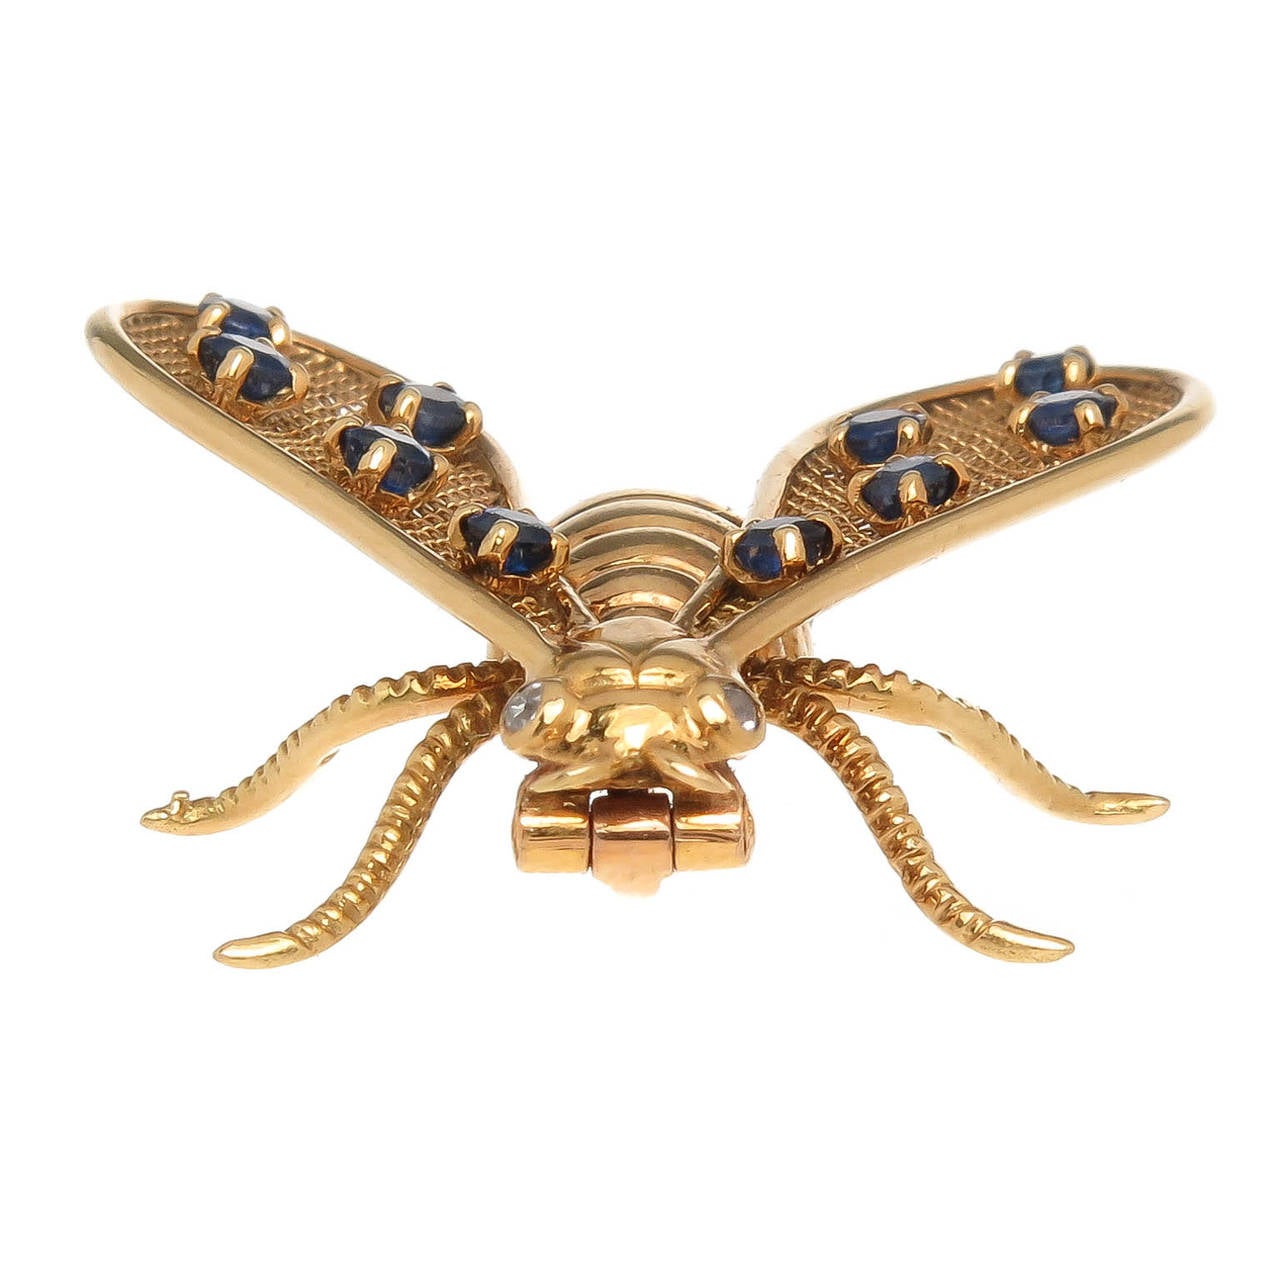 Circa 1990s Chaumet, 18K yellow Gold Bug Brooch, very Fine Detailing, Gold mesh Wings set with Round Brilliant Sapphires and further accented with Diamond Eyes. Original Chaumet Presentation box and Certificate papers.